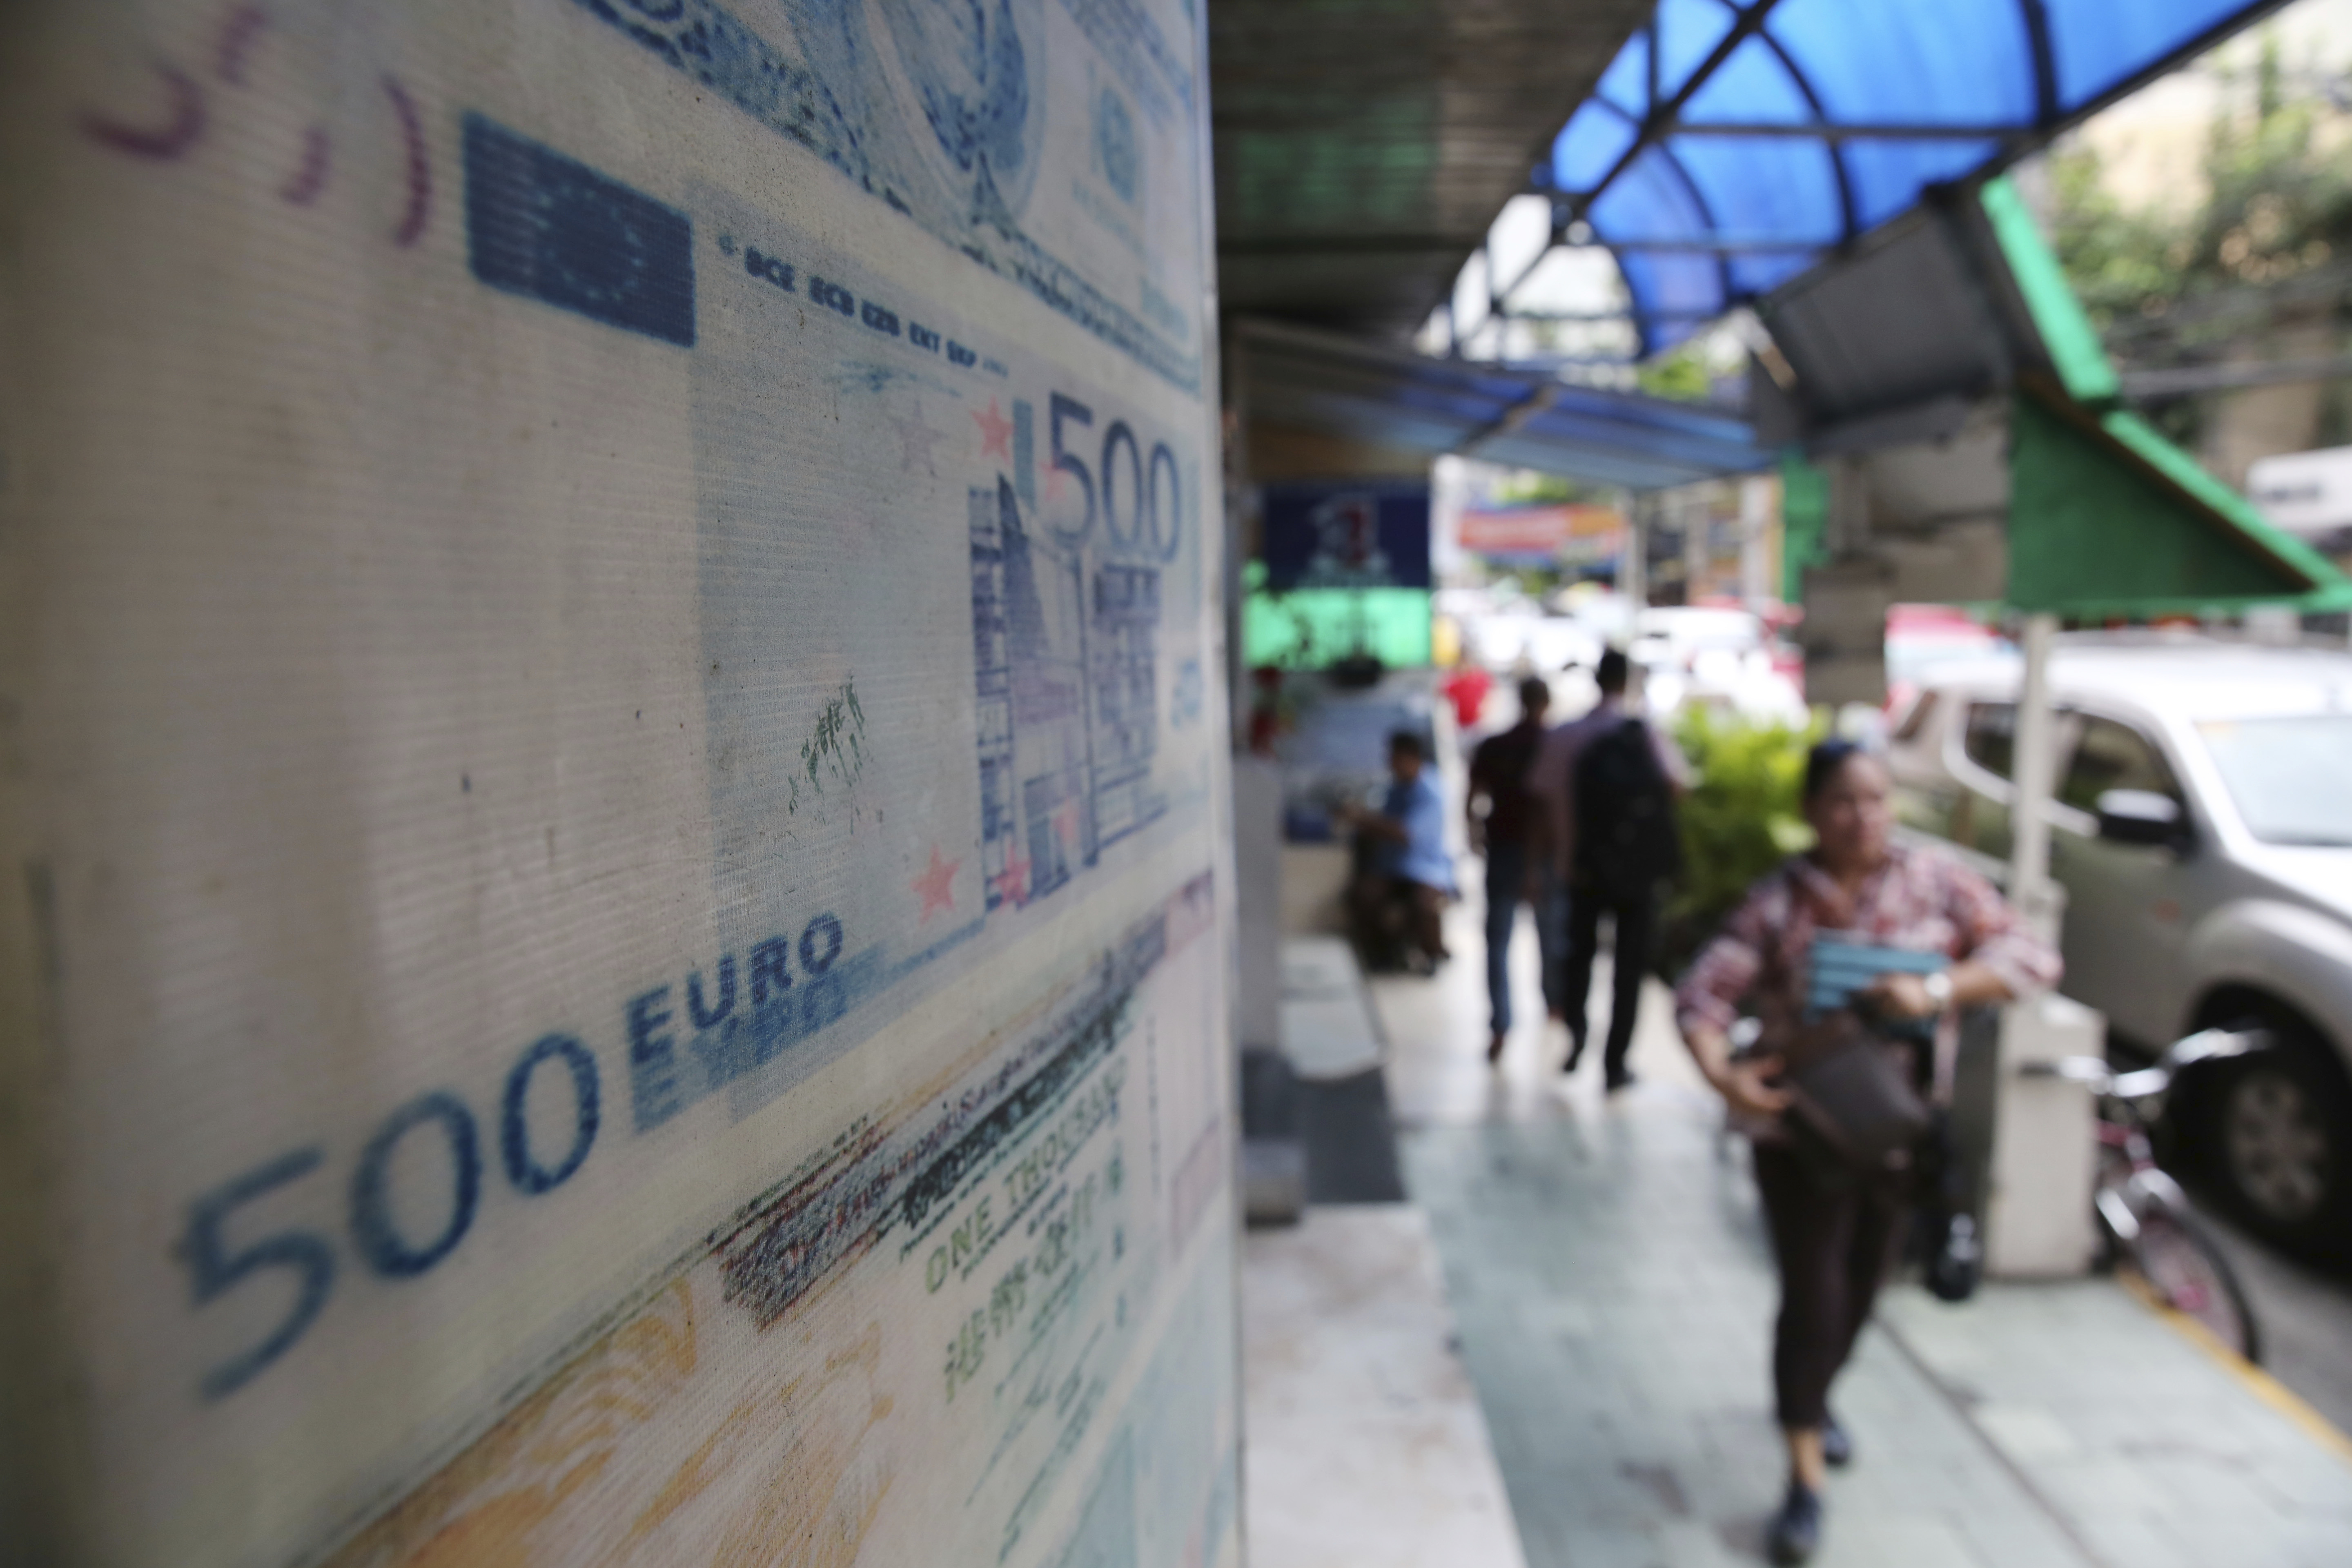 People pass by a 500 Euro bill that is posted on a tarpaulin outside a money changer in Manila, Philippines Thursday, May 18, 2017. The Philippines will no longer accept assistance from the European Union, forgoing grants possibly worth more than 250 million euros ($ 278.7 million) for development projects in the country following President Rodrigo Duterte's earlier challenge on the EU to stop its assistance after the bloc warned that the Philippines risks losing tariff-free exports to Europe because of the thousands killed in the war on drugs launched by Duterte and Manila's moves to revive the death penalty. The EU delegation in Manila said the Philippine government informed it about its decision Wednesday, but it has yet to receive a written notice. (AP Photo/Aaron Favila)